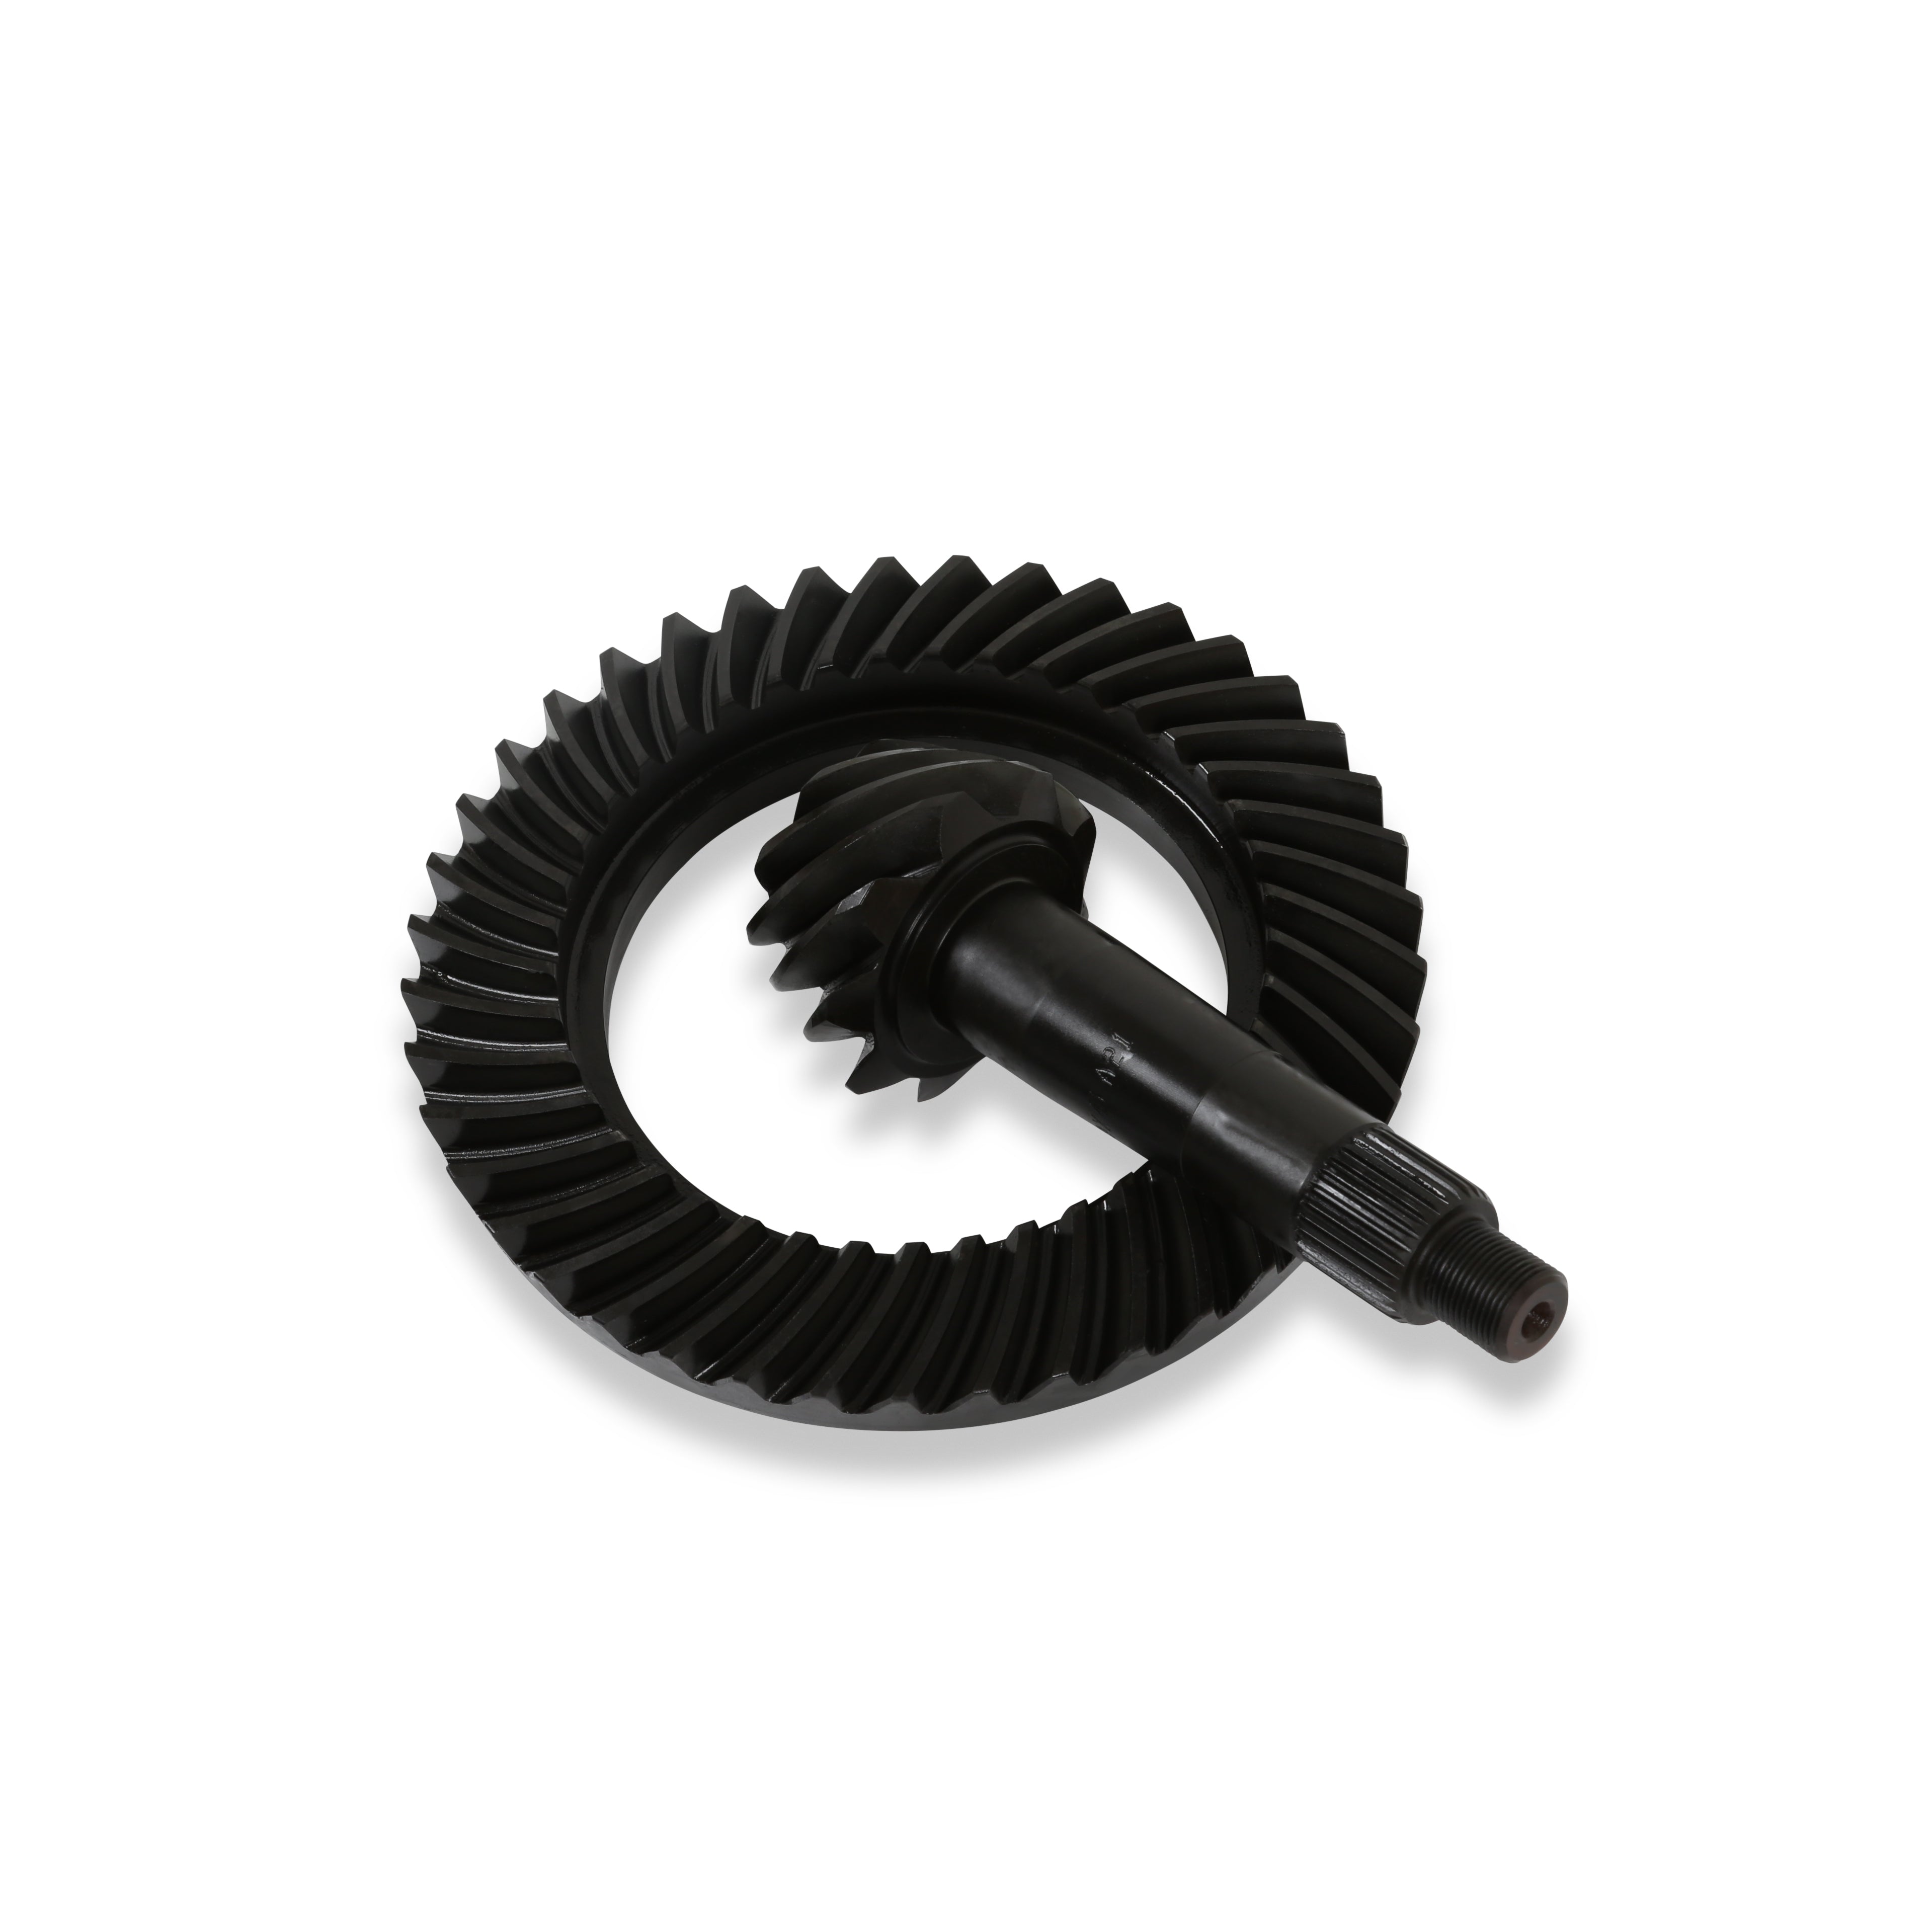 Hurst Chevrolet, GMC Differential Ring and Pinion 02-114